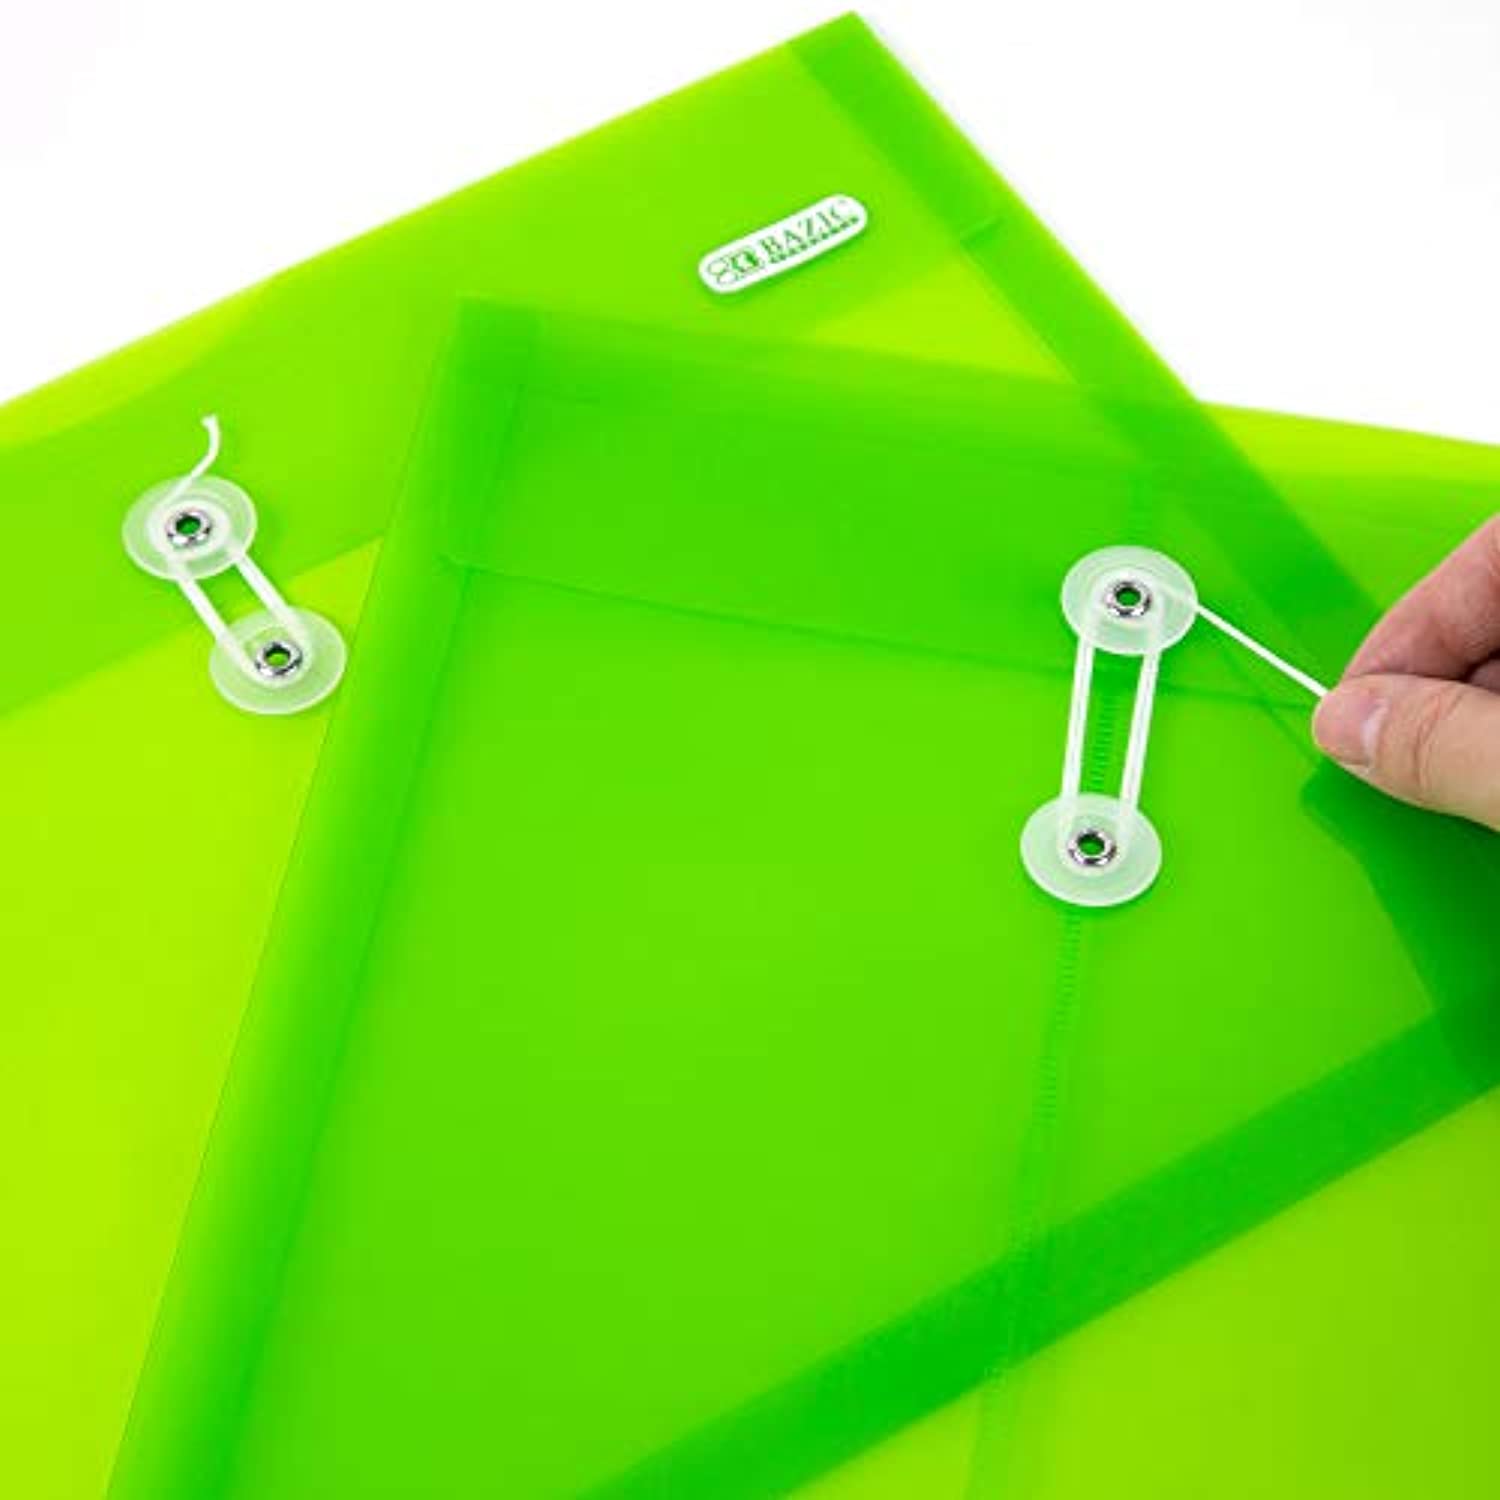 BAZIC 1 Top & 1 Side Loading Letter Size String Closure Envelope, Assorted Color Clear Poly Plastic Files, Office A4 Legal Folder String-Tie, 6-Pack (Total 12 Files).